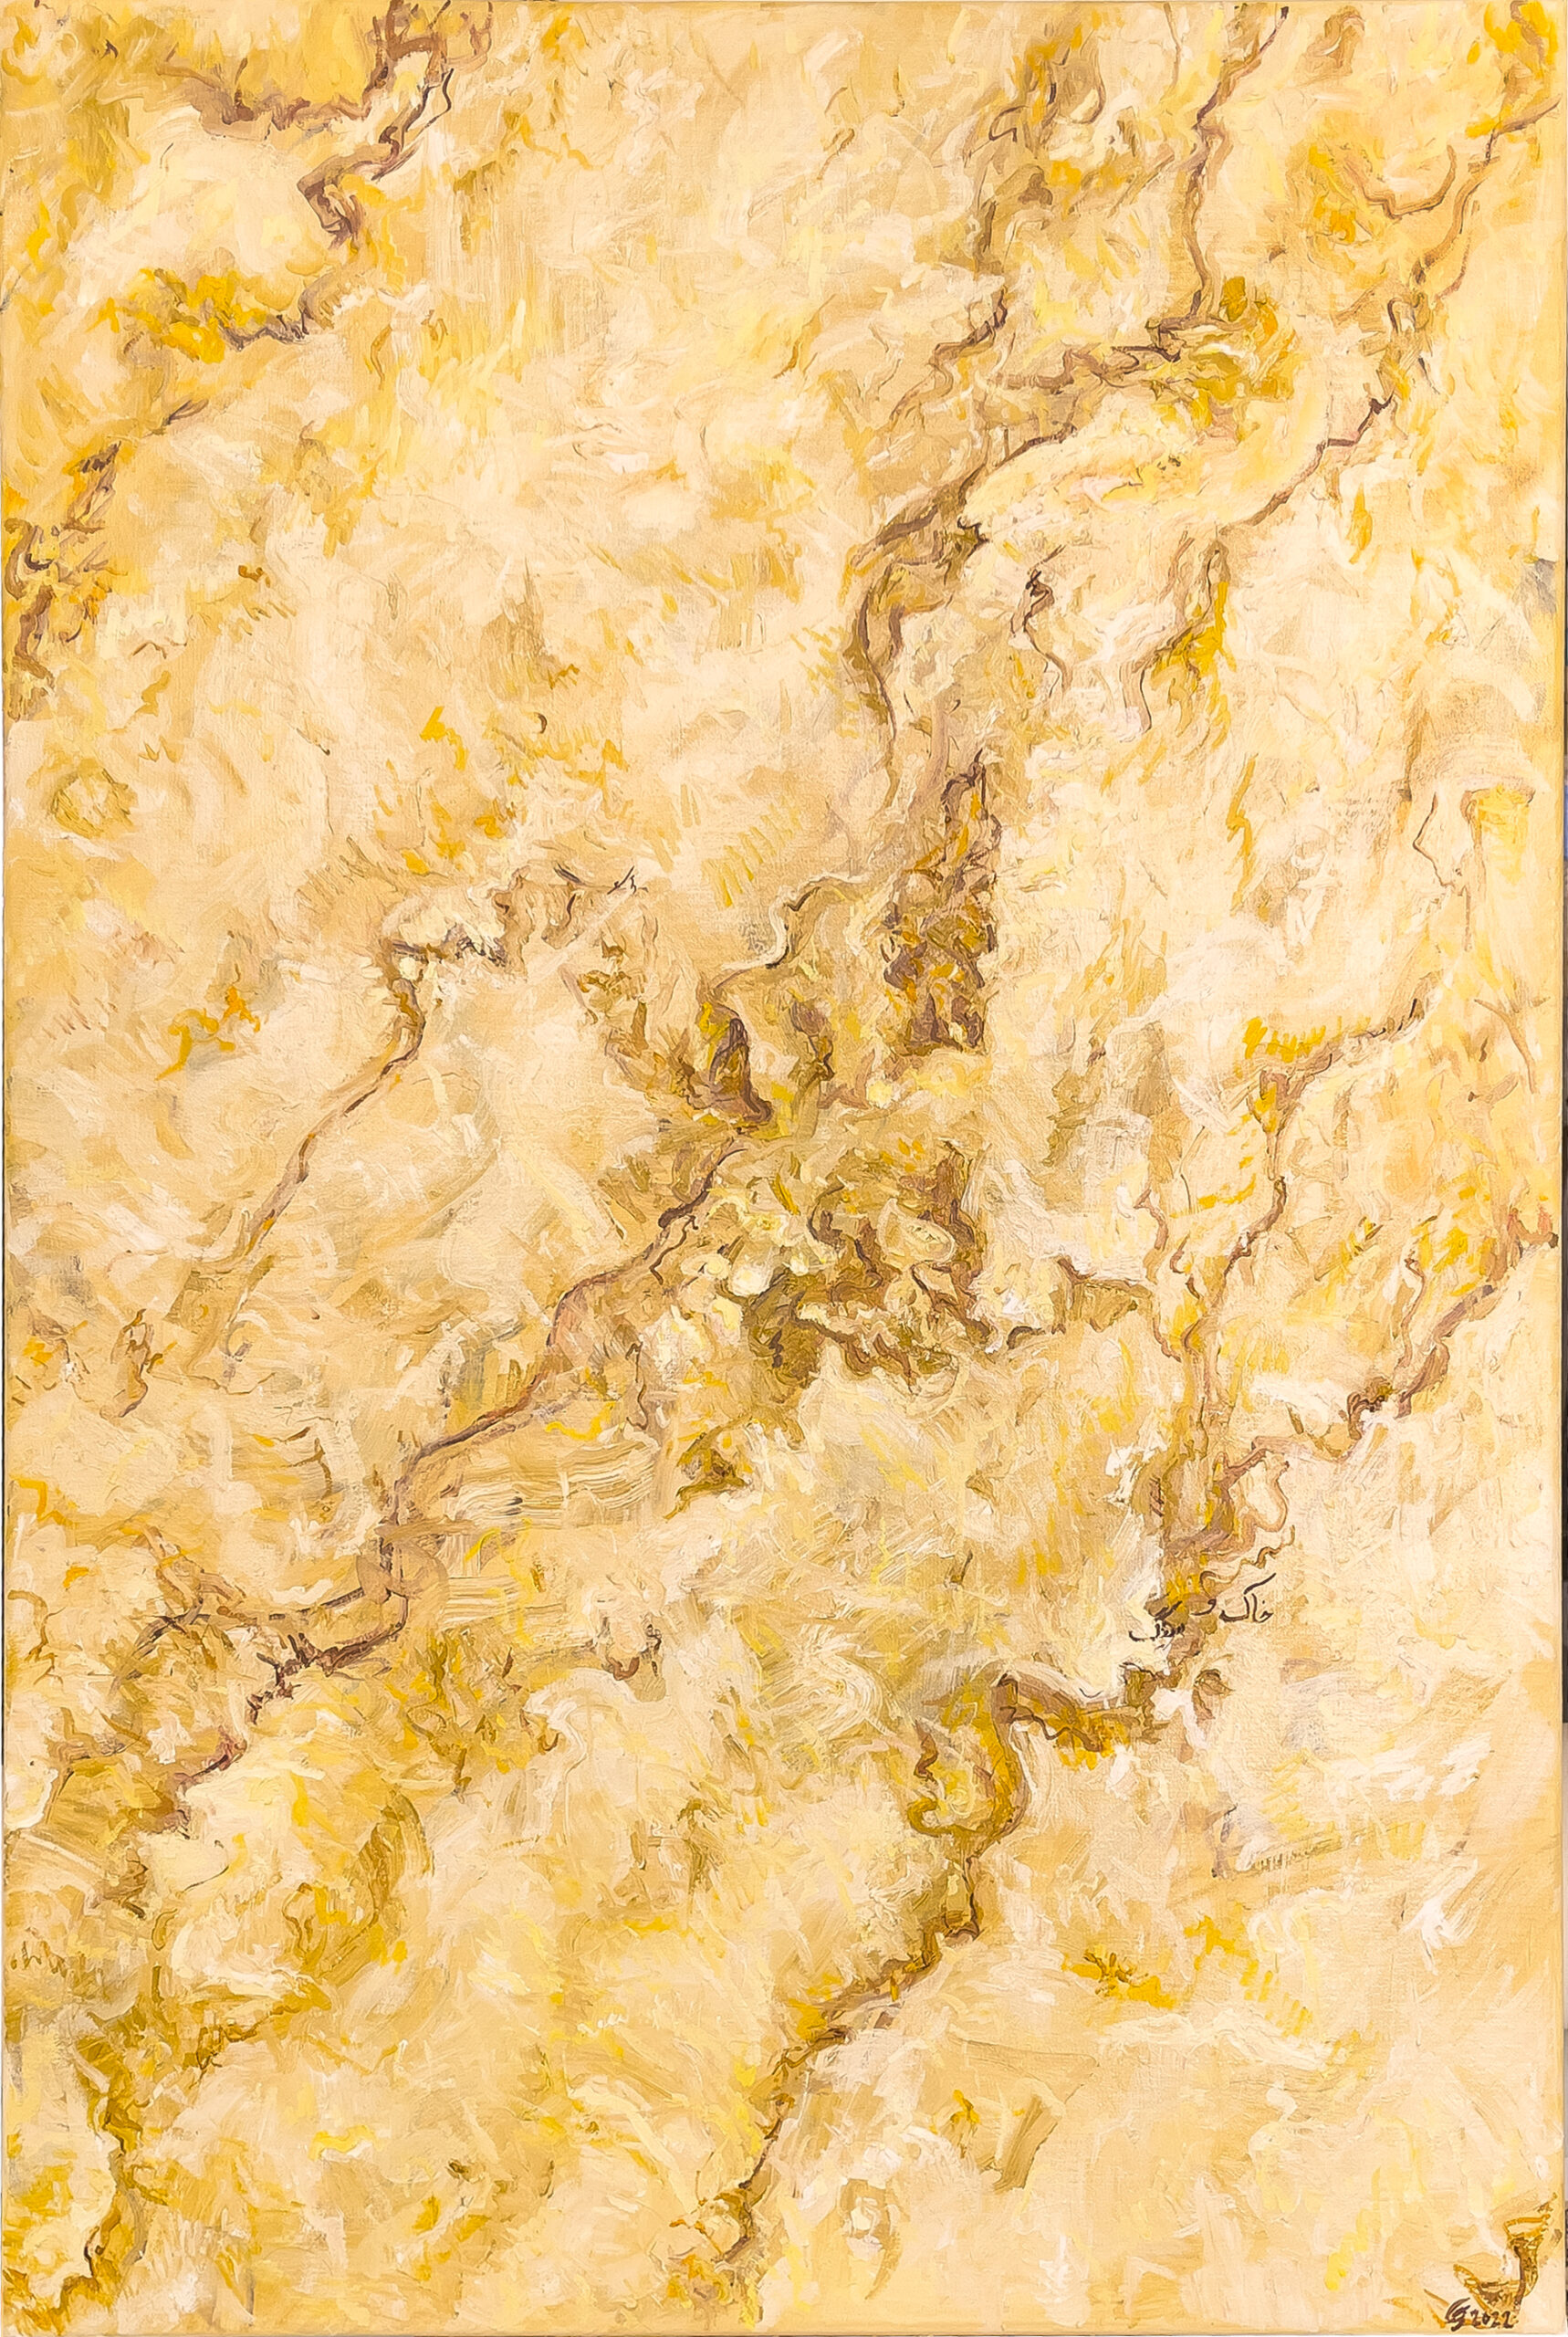 Yellow Marble||| Oil on Canvas||| 51 x 76cm||| 2022